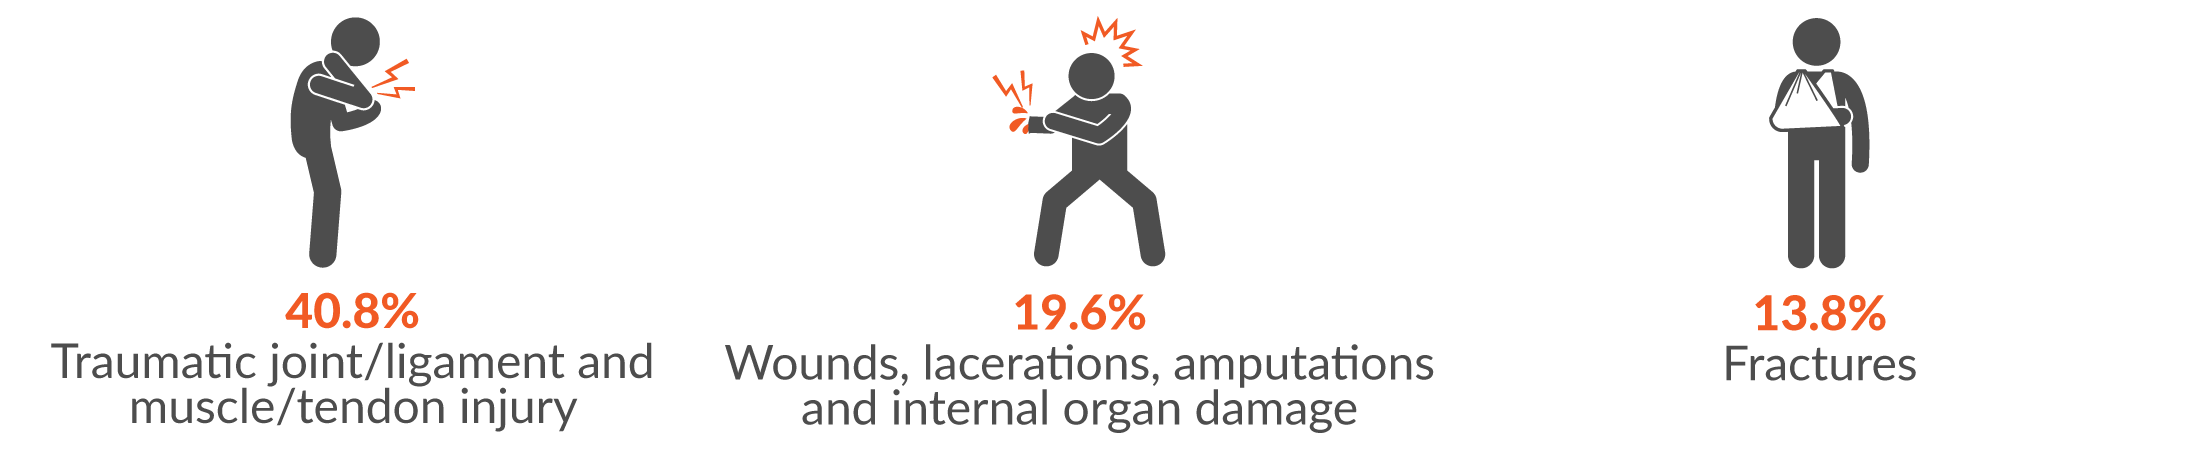 This infographic shows the main three injury groups for serious injuries were 40.8% traumatic joint/ligament and muscle/tendon injury; 19.6% wounds, lacerations, amputations and internal organ damage; and 13.8% fractures.